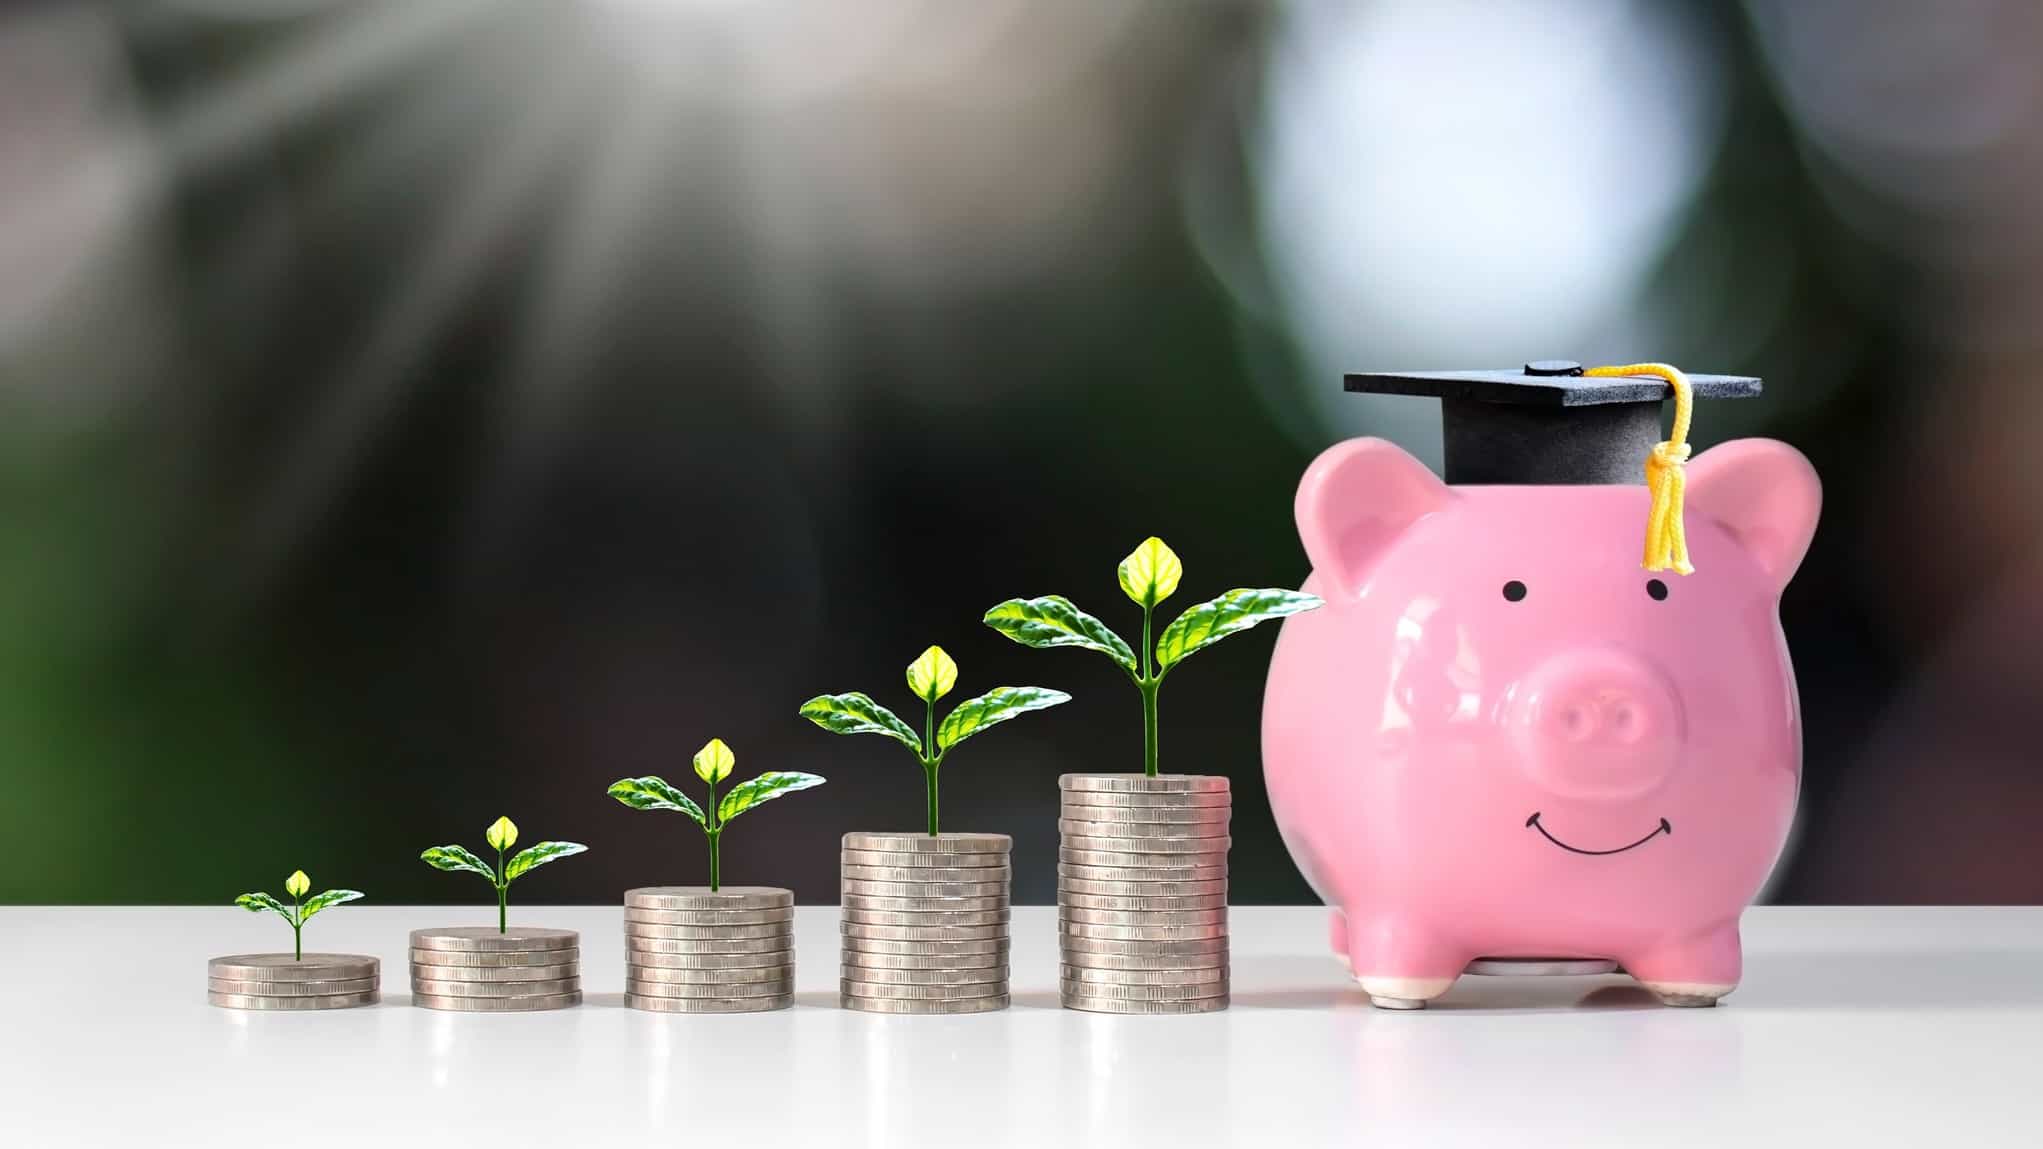 A smiling pink piggy bank graduates after years of growth